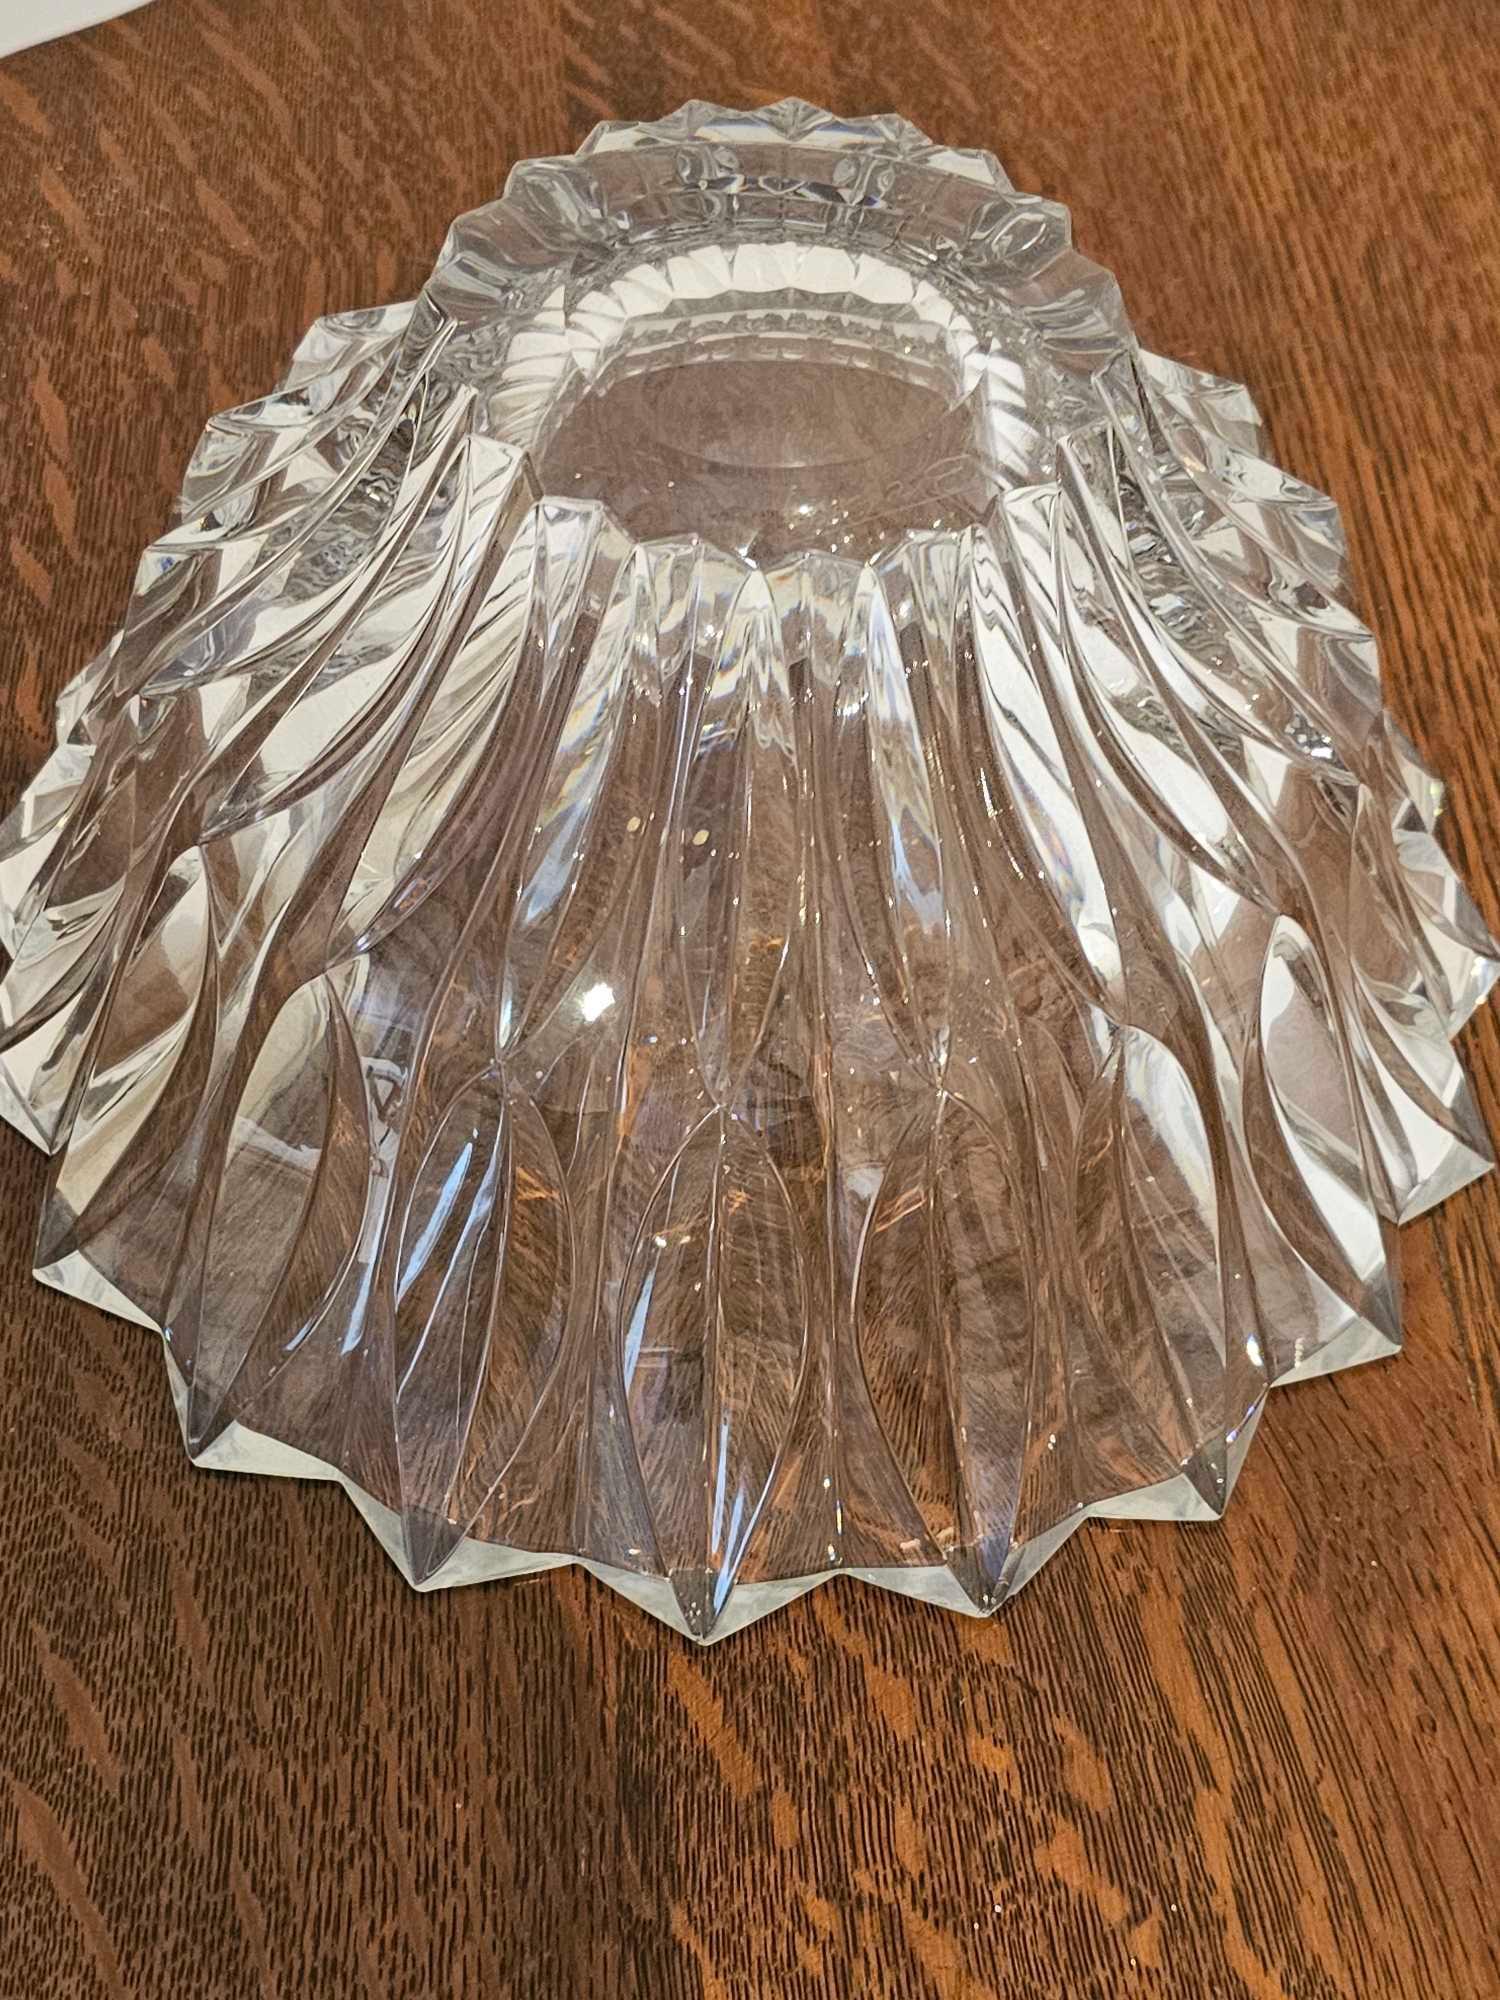 Faceted Cut Crystal Large Bowl 29 X 18cm - Image 7 of 7